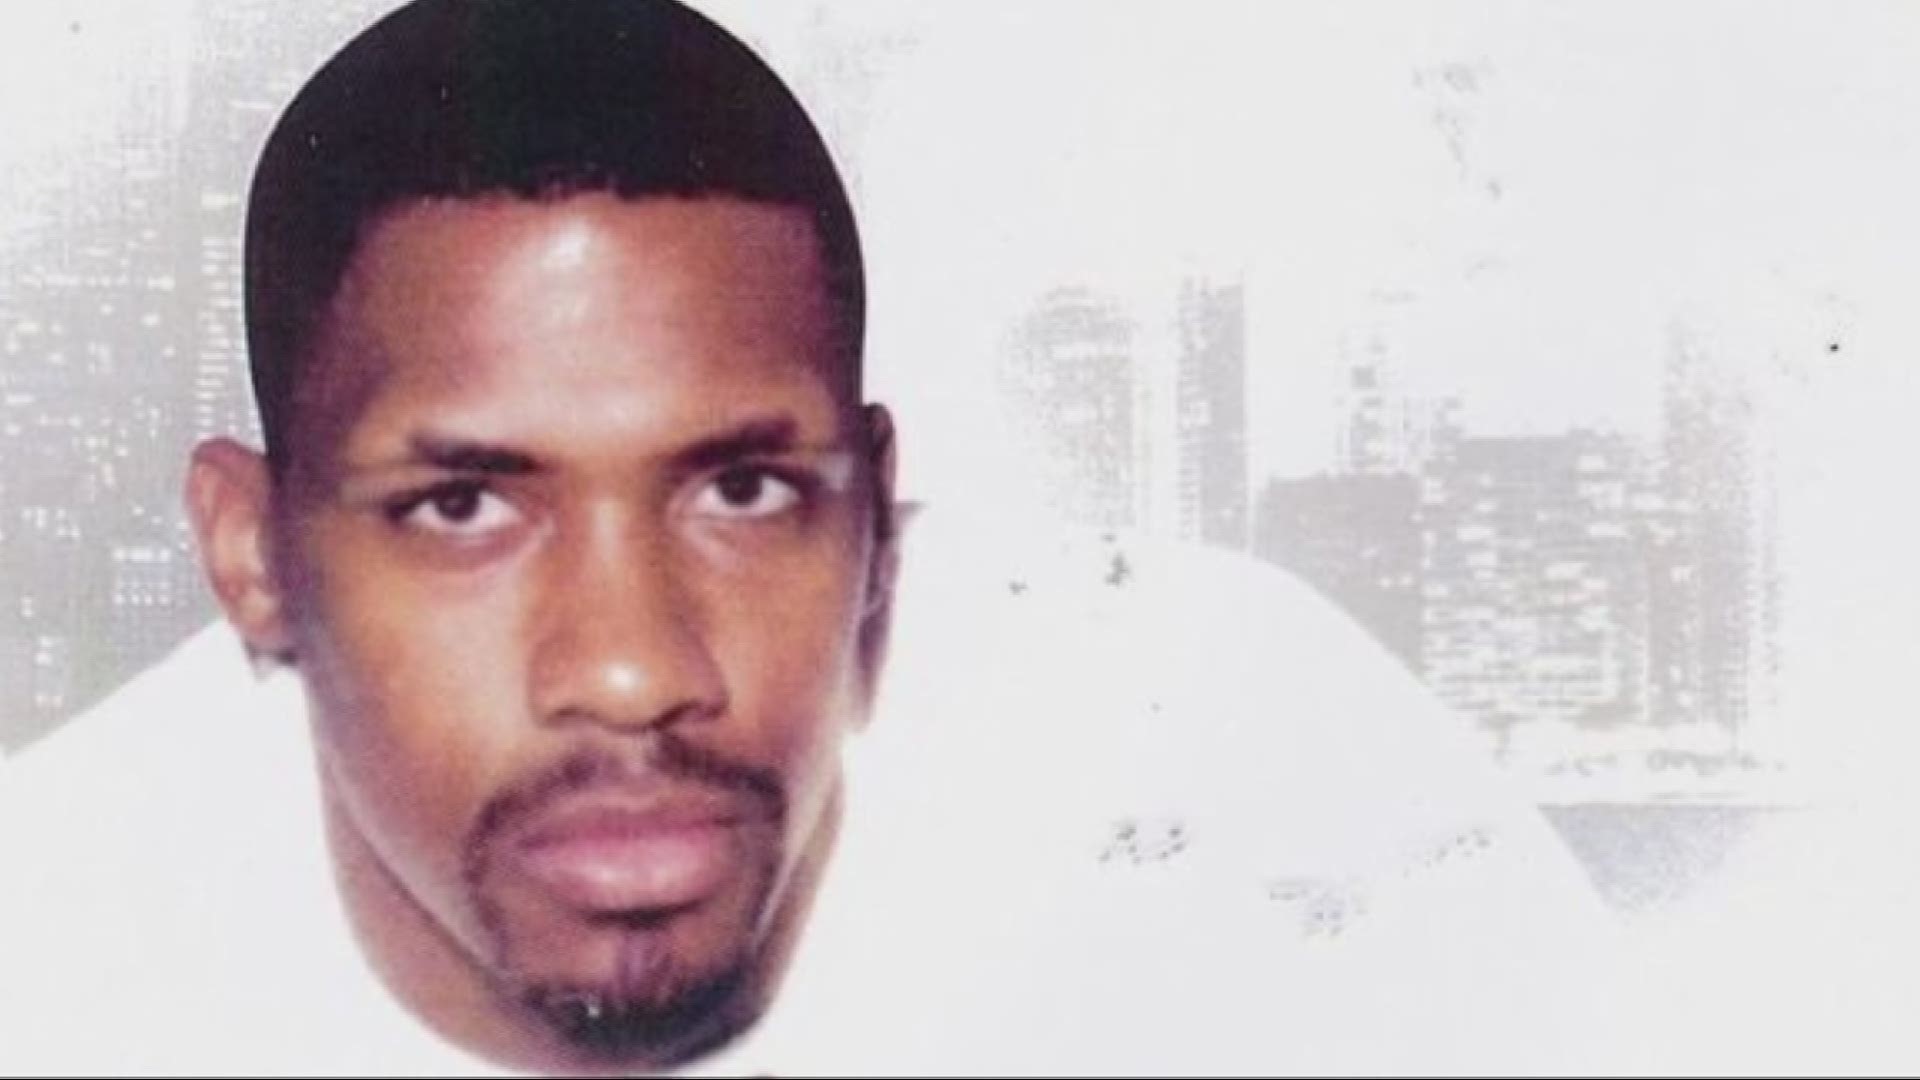 The most notorious drug kingpin in DC history is back in court. A judge is considering reducing Rayful Edmonds' jail time.